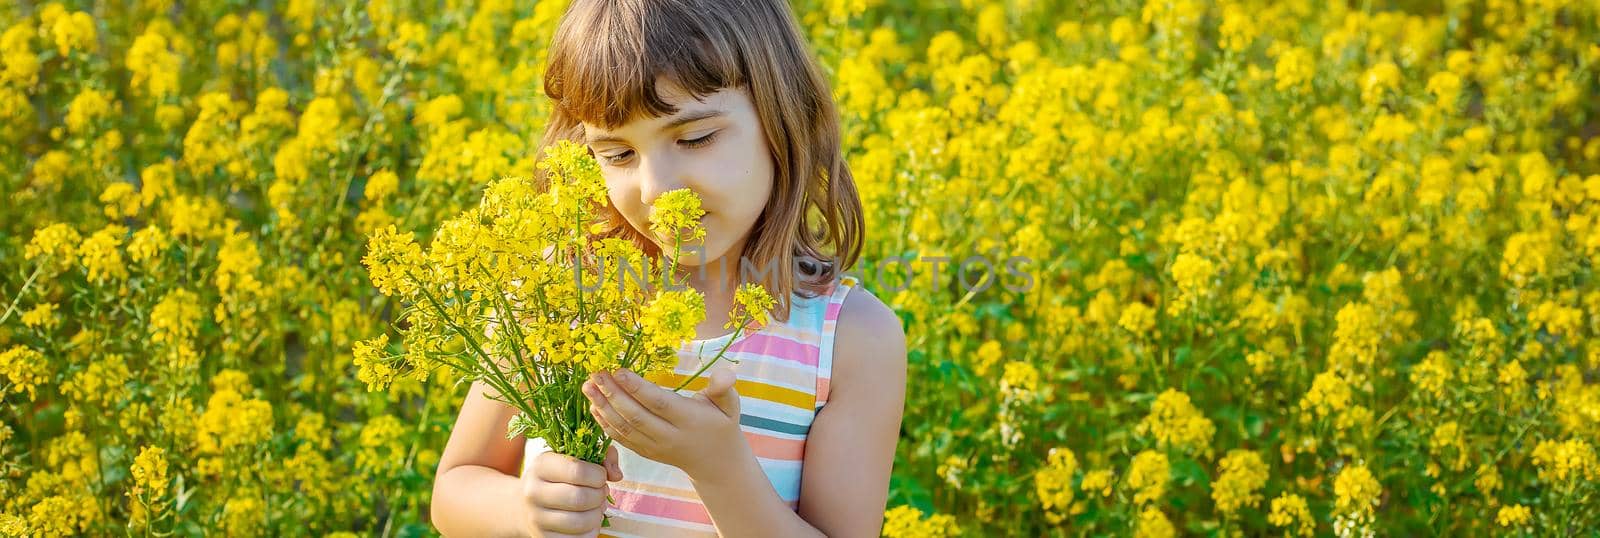 A child in a yellow field, mustard blooms. Selective focus..